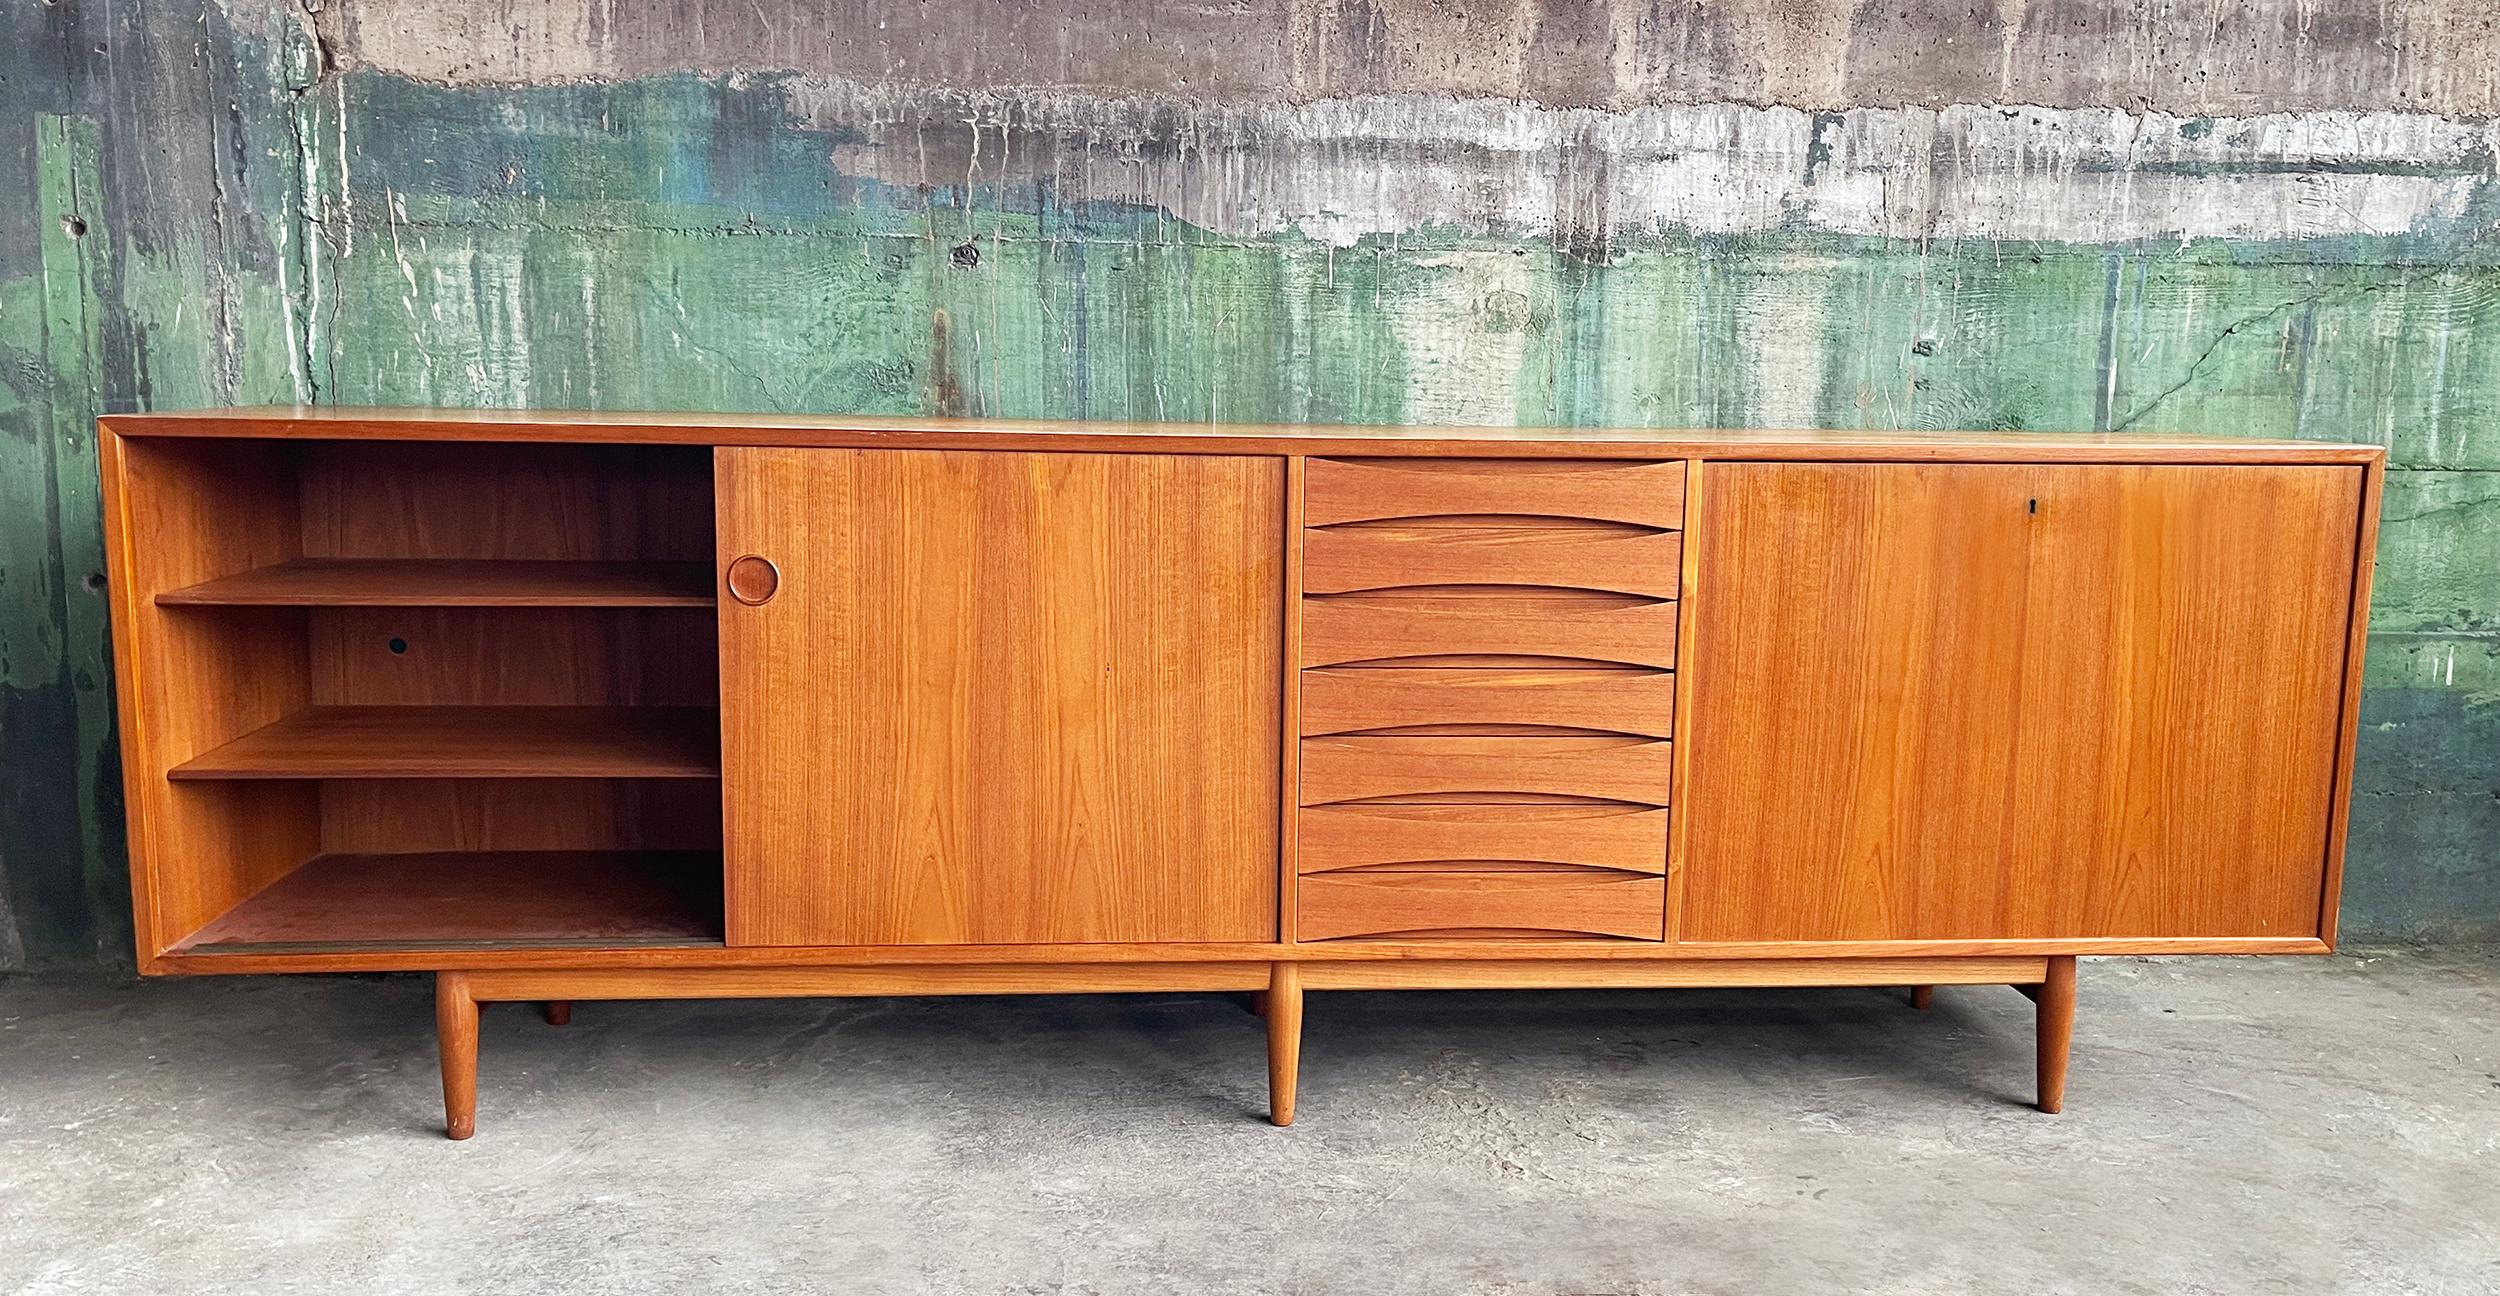 This Sibast Mobler's model 29A teak credenza designed by Arne Vodder during the 1950s is truly stunning, coveted and a rare designer piece to have the opportunity to collect. With a length of 8 feet, this piece boasts exceptional workmanship, sleek